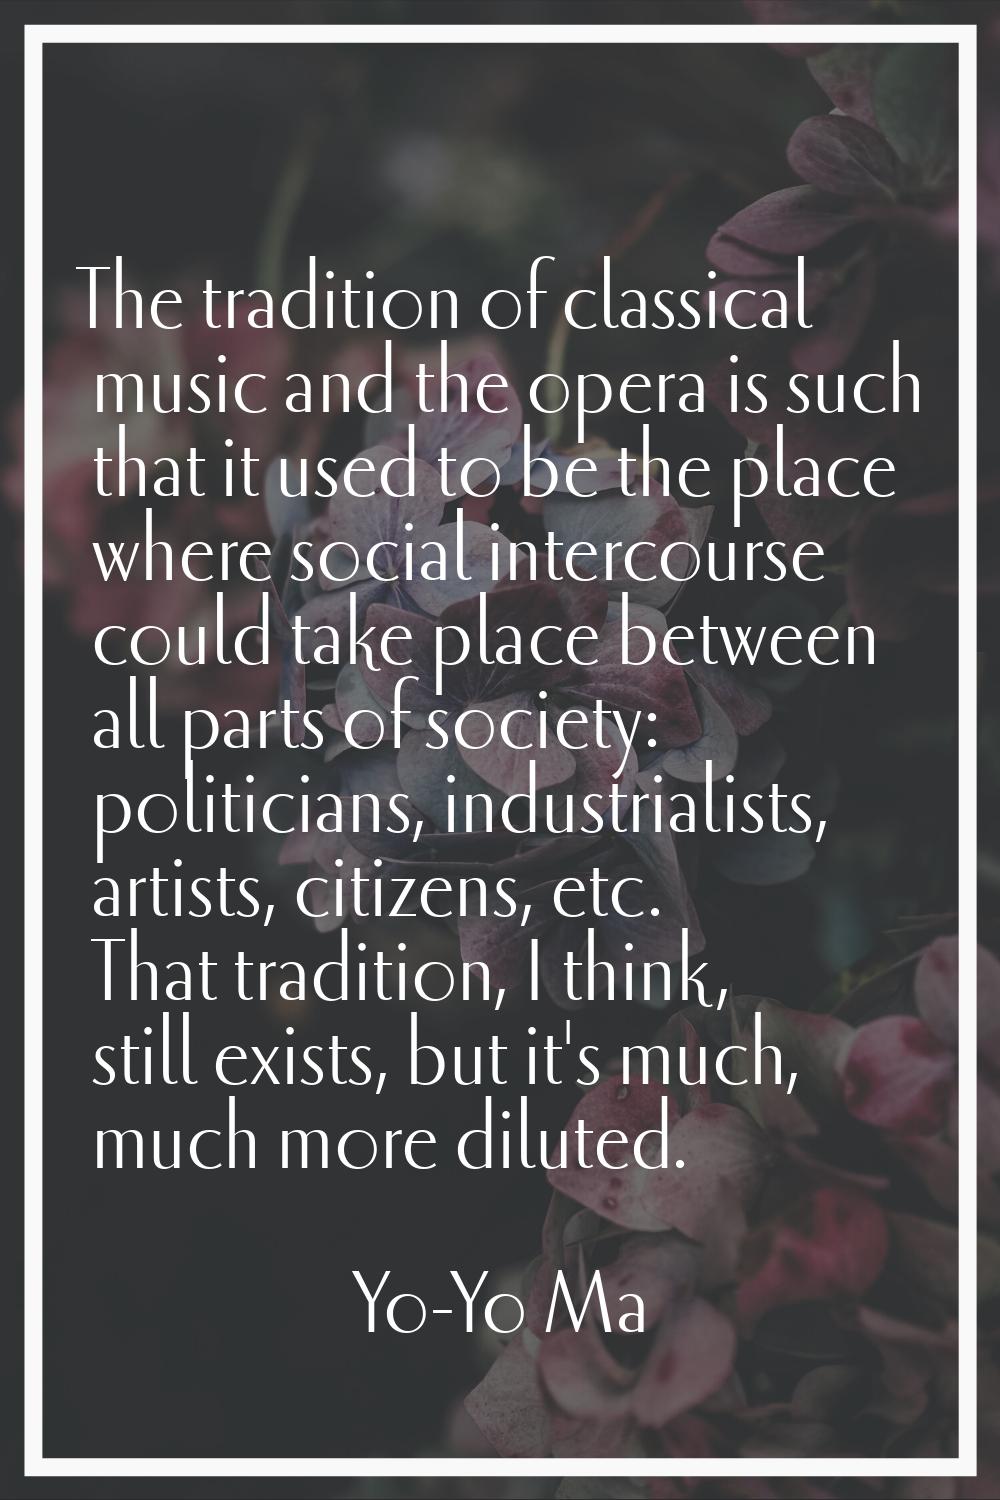 The tradition of classical music and the opera is such that it used to be the place where social in